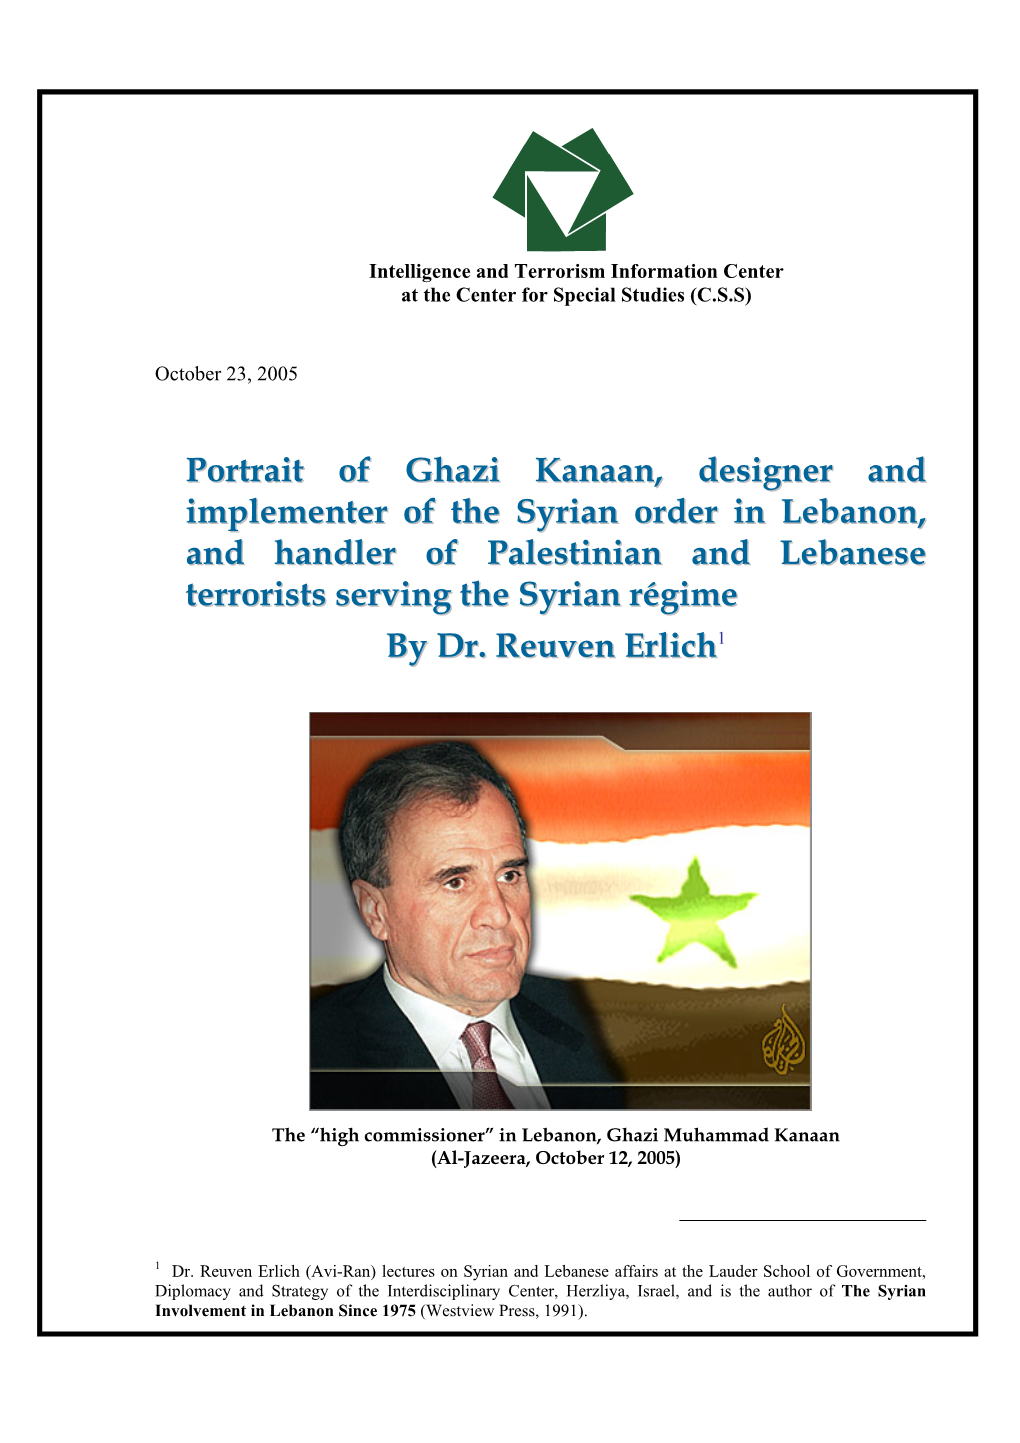 Portrait of Ghazi Kanaan, Designer and Implementer of the Syrian Order in Lebanon, and Handler of Palestinian and Lebanese Terrorists Serving the Syrian Régime by Dr